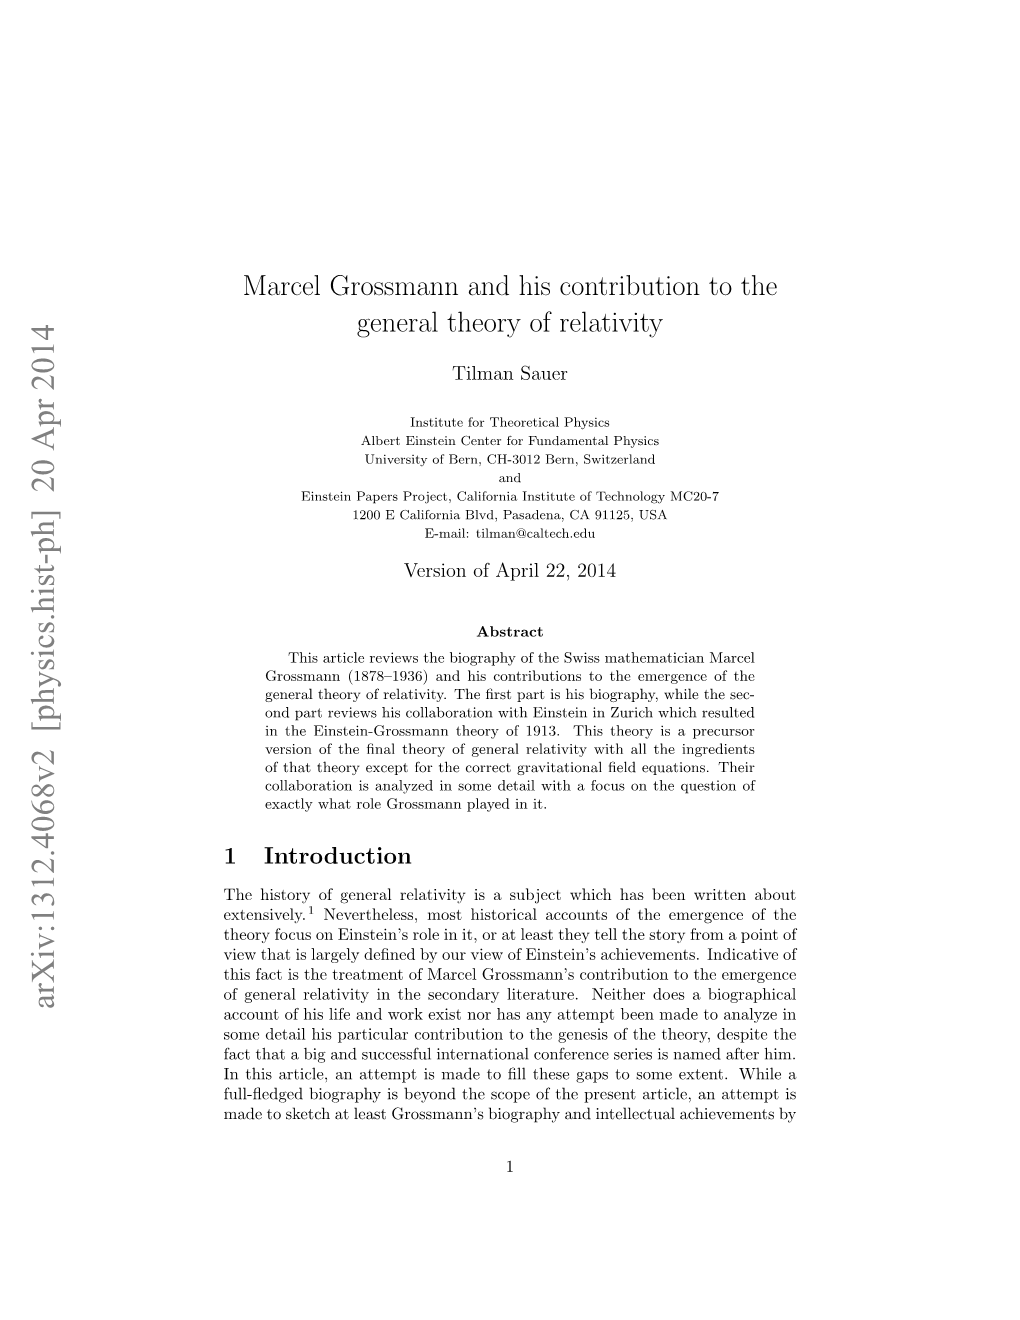 Marcel Grossmann and His Contribution to the General Theory of Relativity